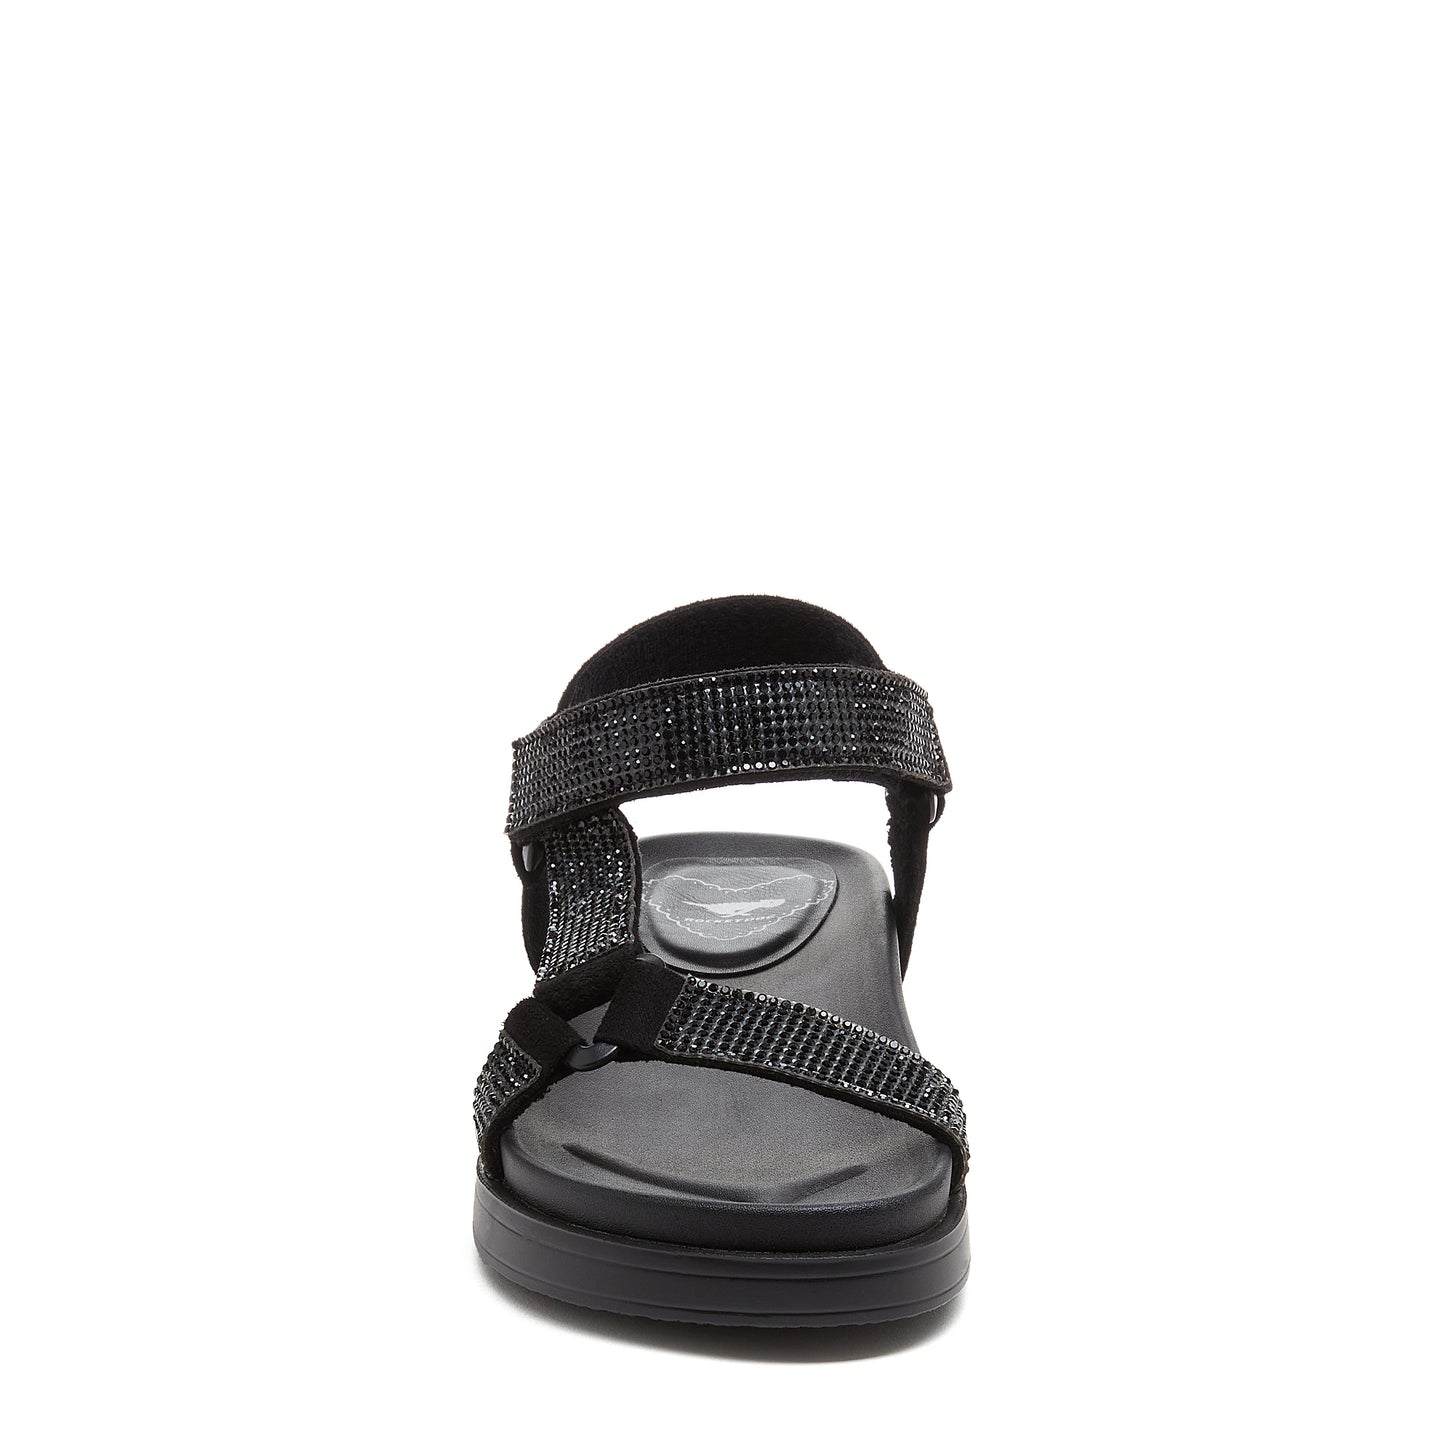 Rocket Dog Spry Black Sandal: Your New Best Friend for Anywhere, Anytime ☀️